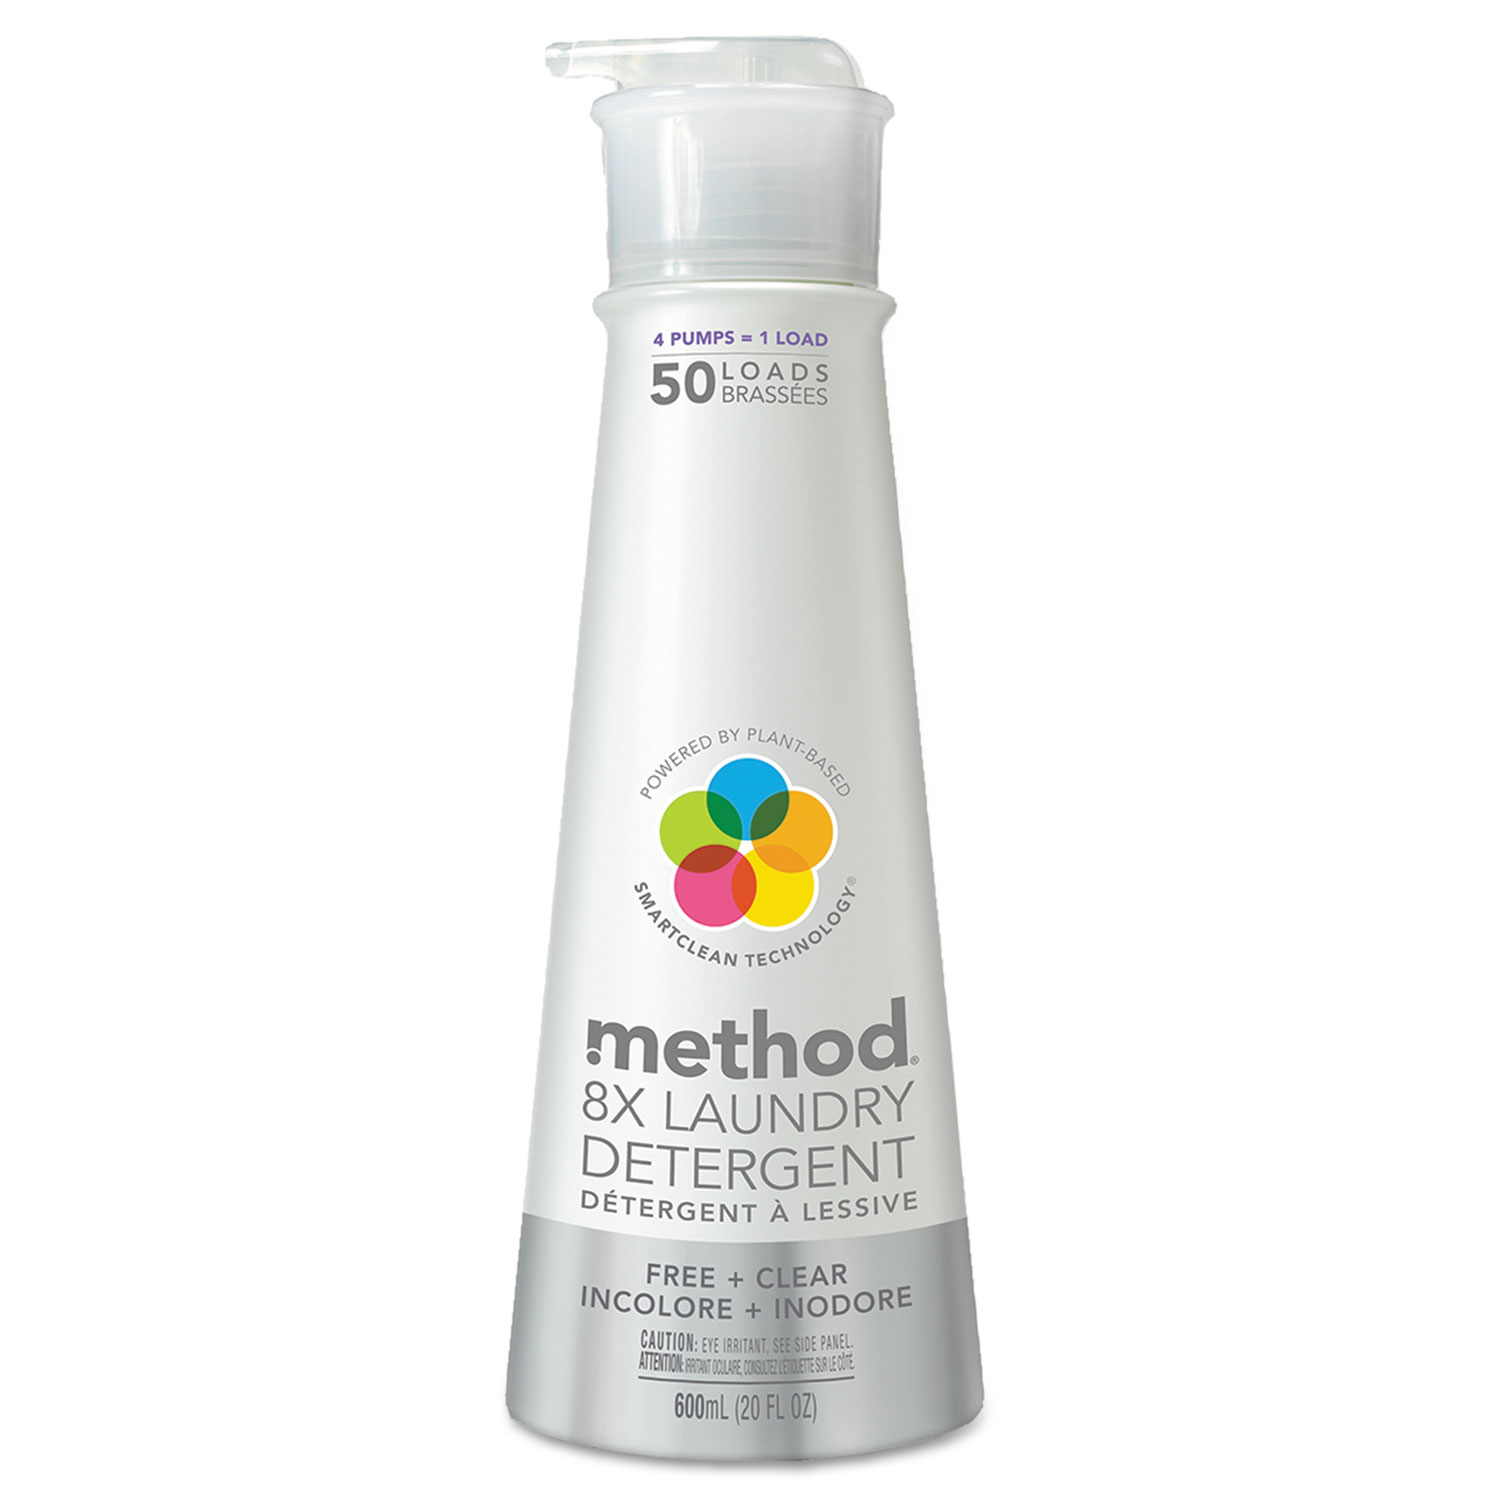  Method 81793901126 8X Laundry Detergent, Free & Clear, 20 oz Bottle (MTH01126) 